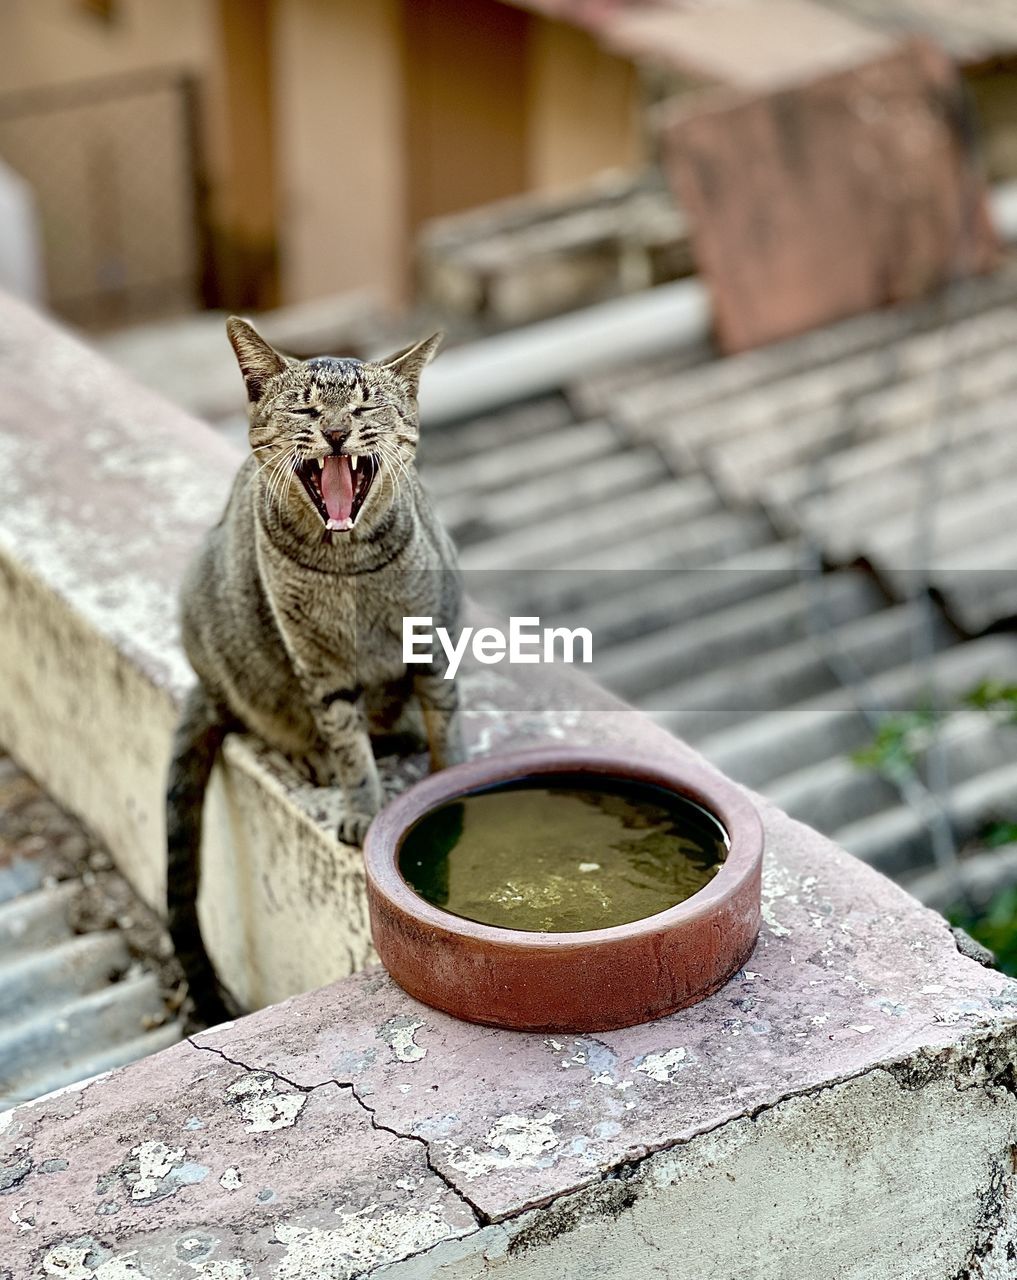 animal, cat, animal themes, mammal, domestic animals, one animal, pet, domestic cat, feline, small to medium-sized cats, no people, portrait, looking at camera, felidae, architecture, focus on foreground, sitting, wild cat, outdoors, day, wood